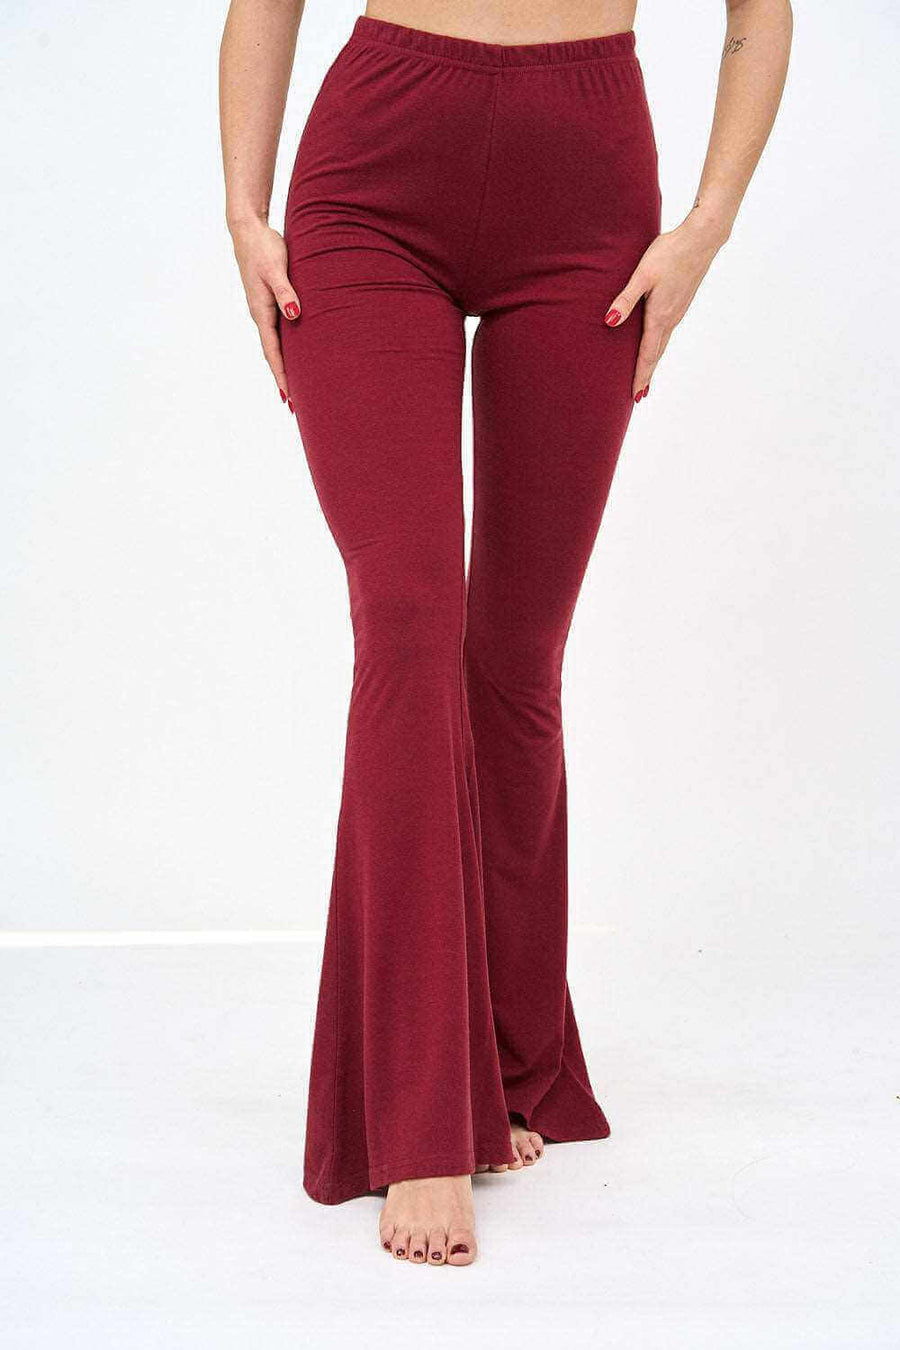 Front Pose of Womens Bell Bottom Leggings in Maroon